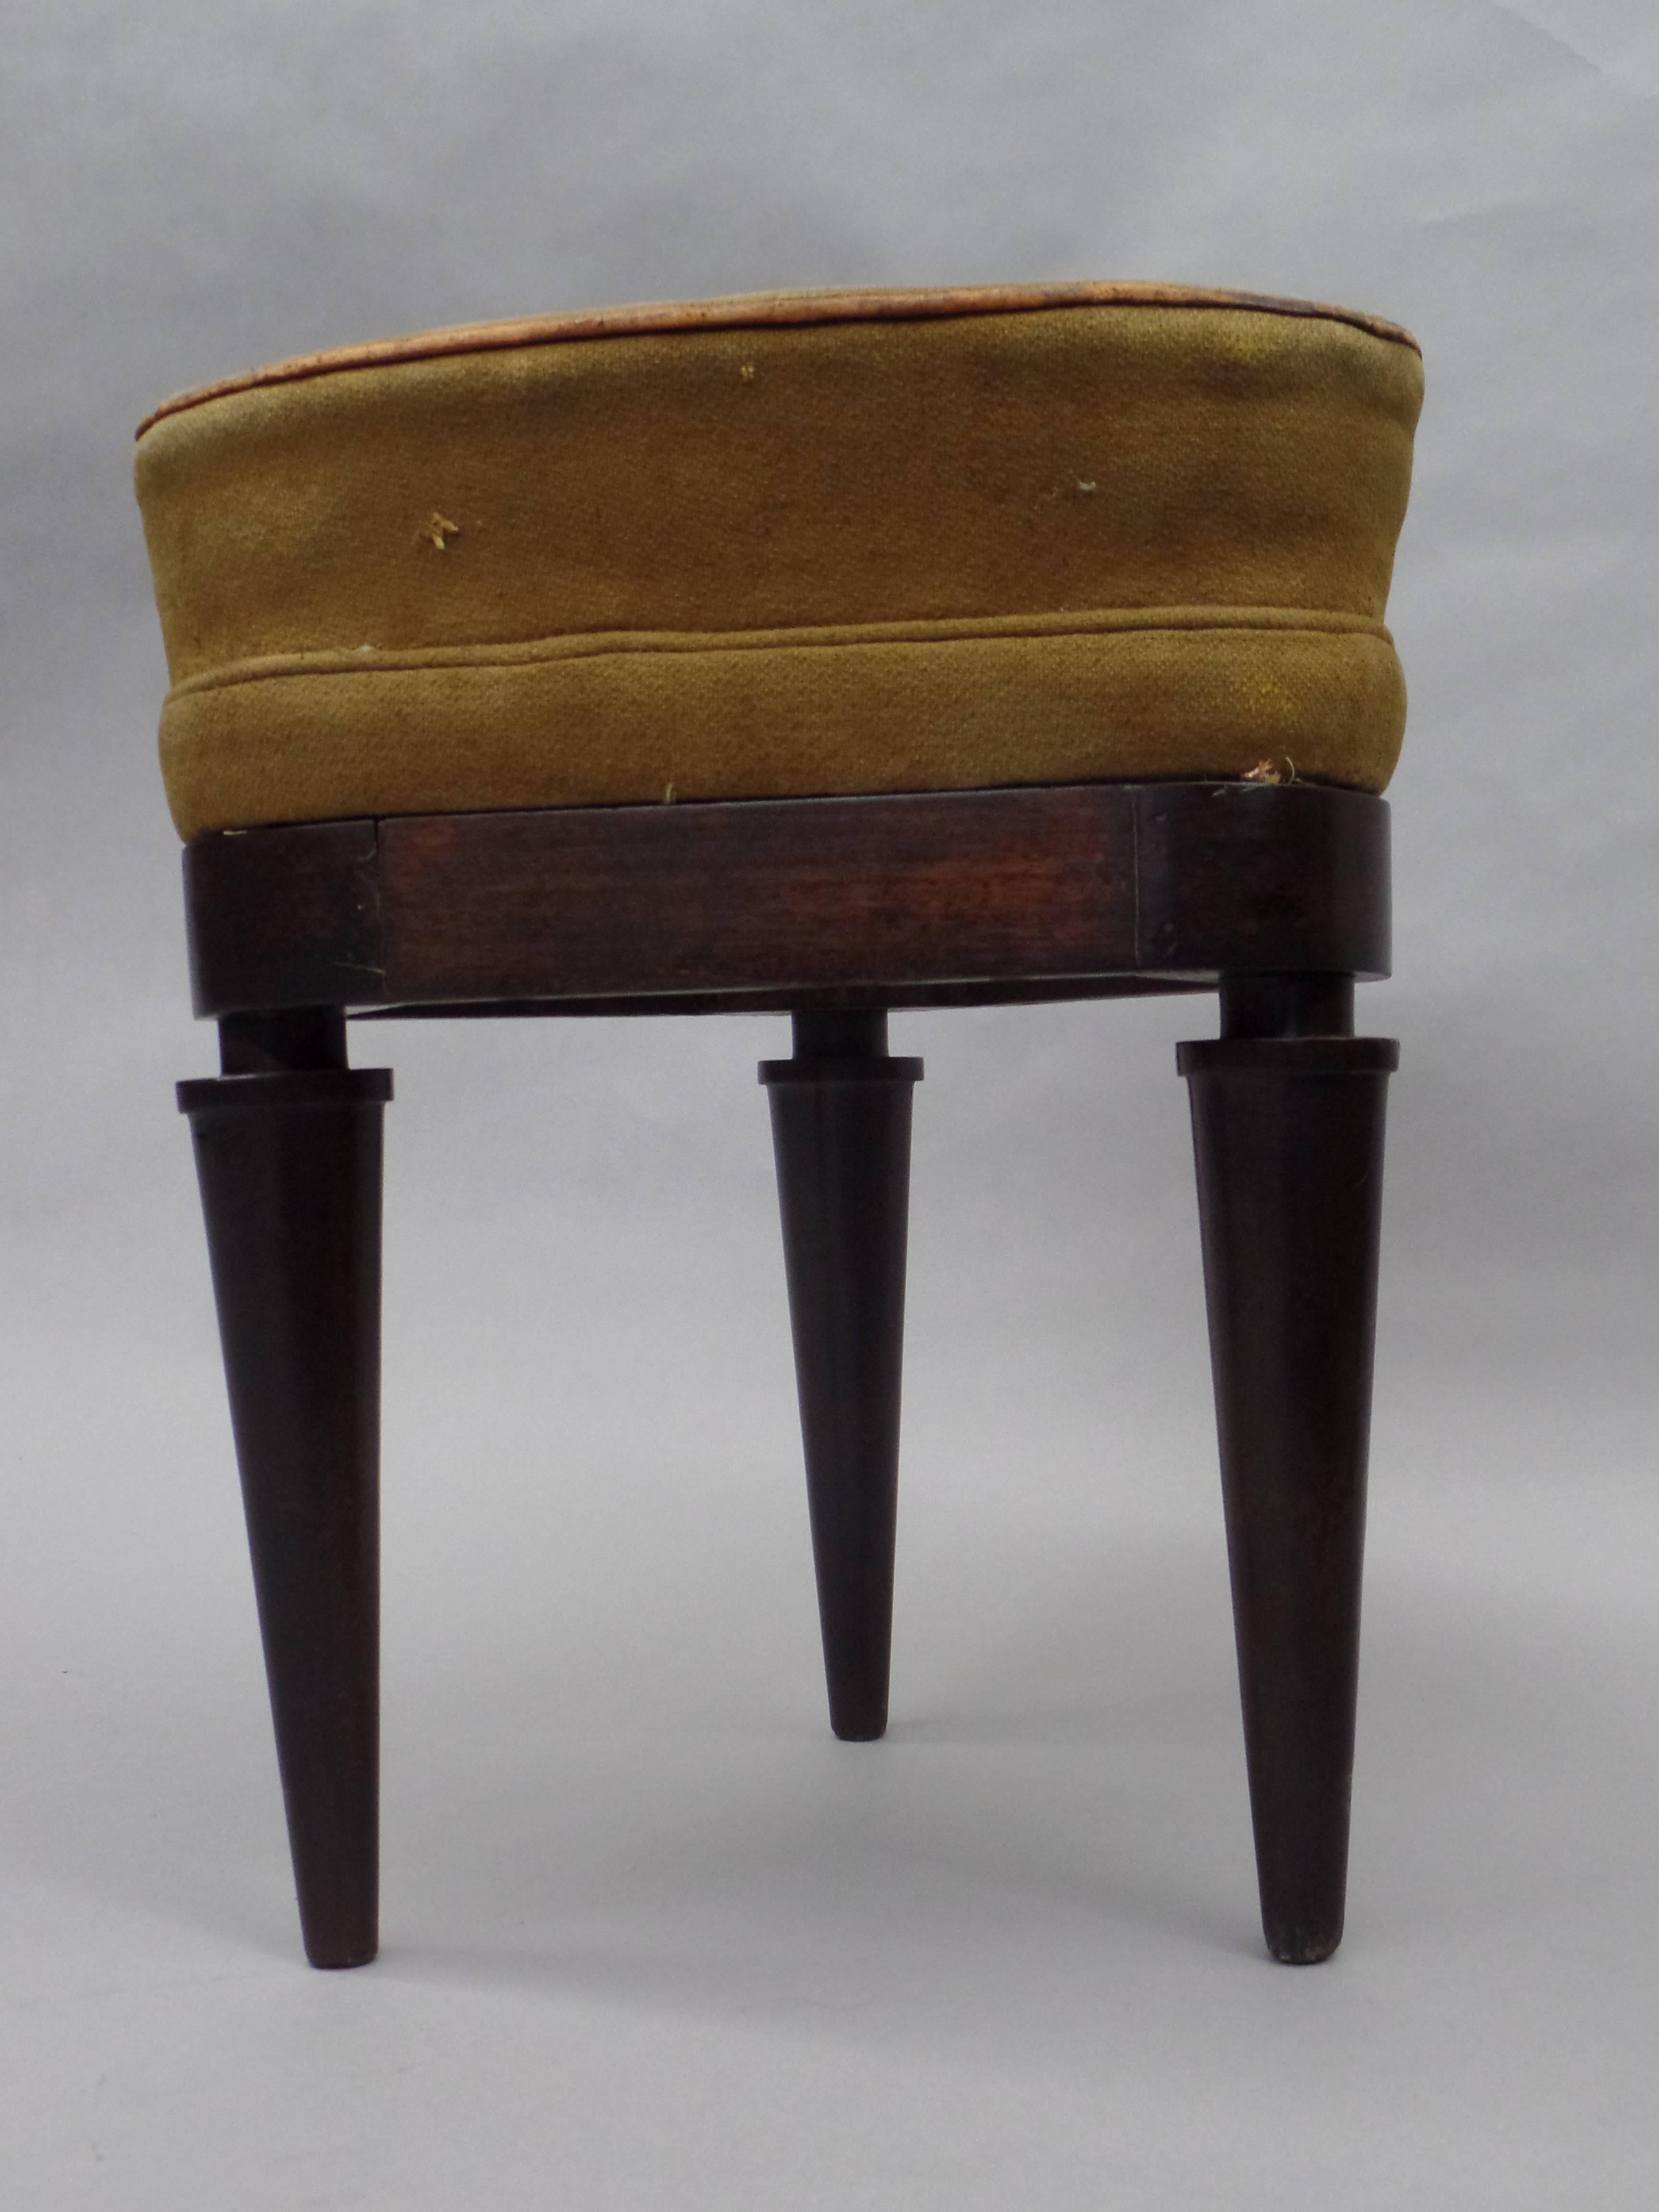 French Modern Neoclassical Mahogany and Suede Tri-Corner Stools, Andre Arbus For Sale 1